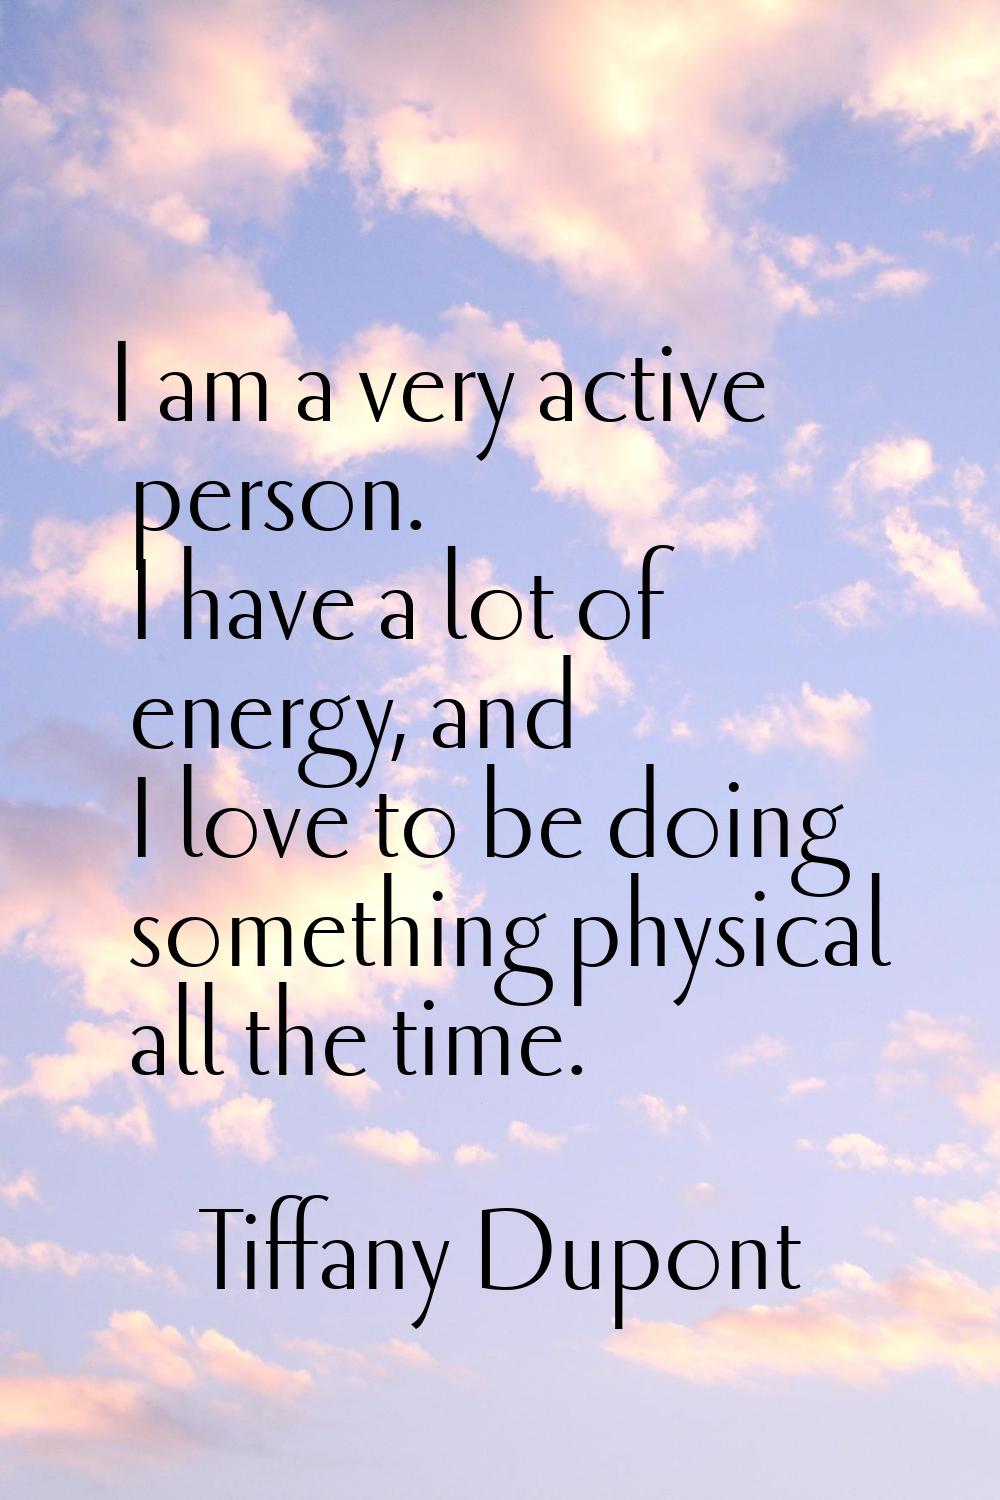 I am a very active person. I have a lot of energy, and I love to be doing something physical all th